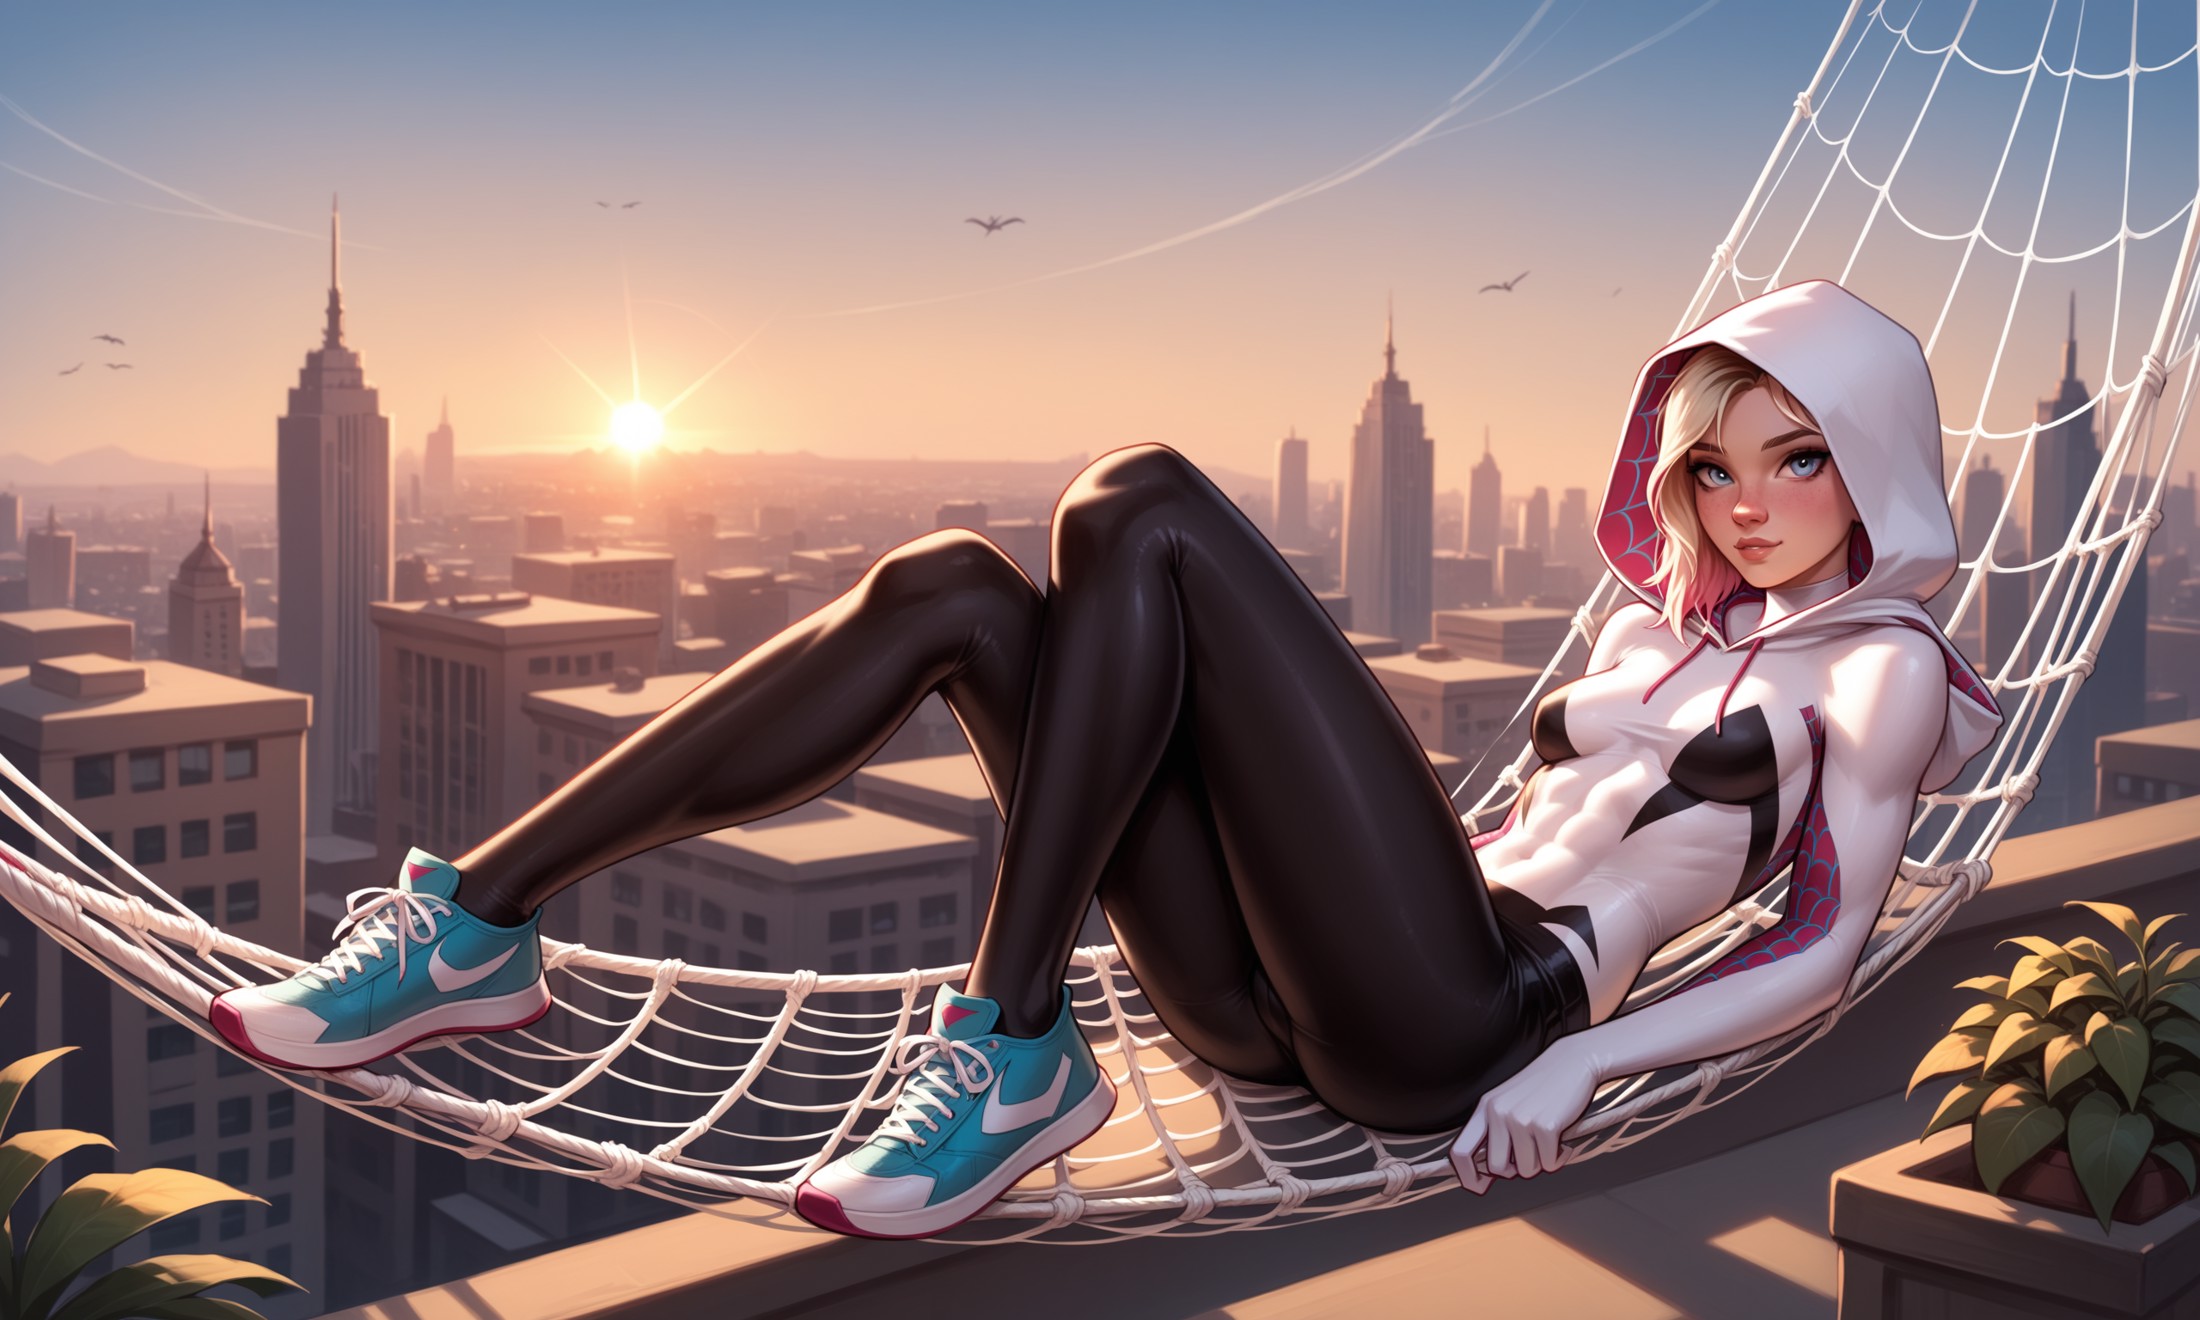 score_9, score_8_up, score_7_up, score_6_up, score_5_up, score_4_up, source_cartoon, rating_save, spider gwen lying in a w...